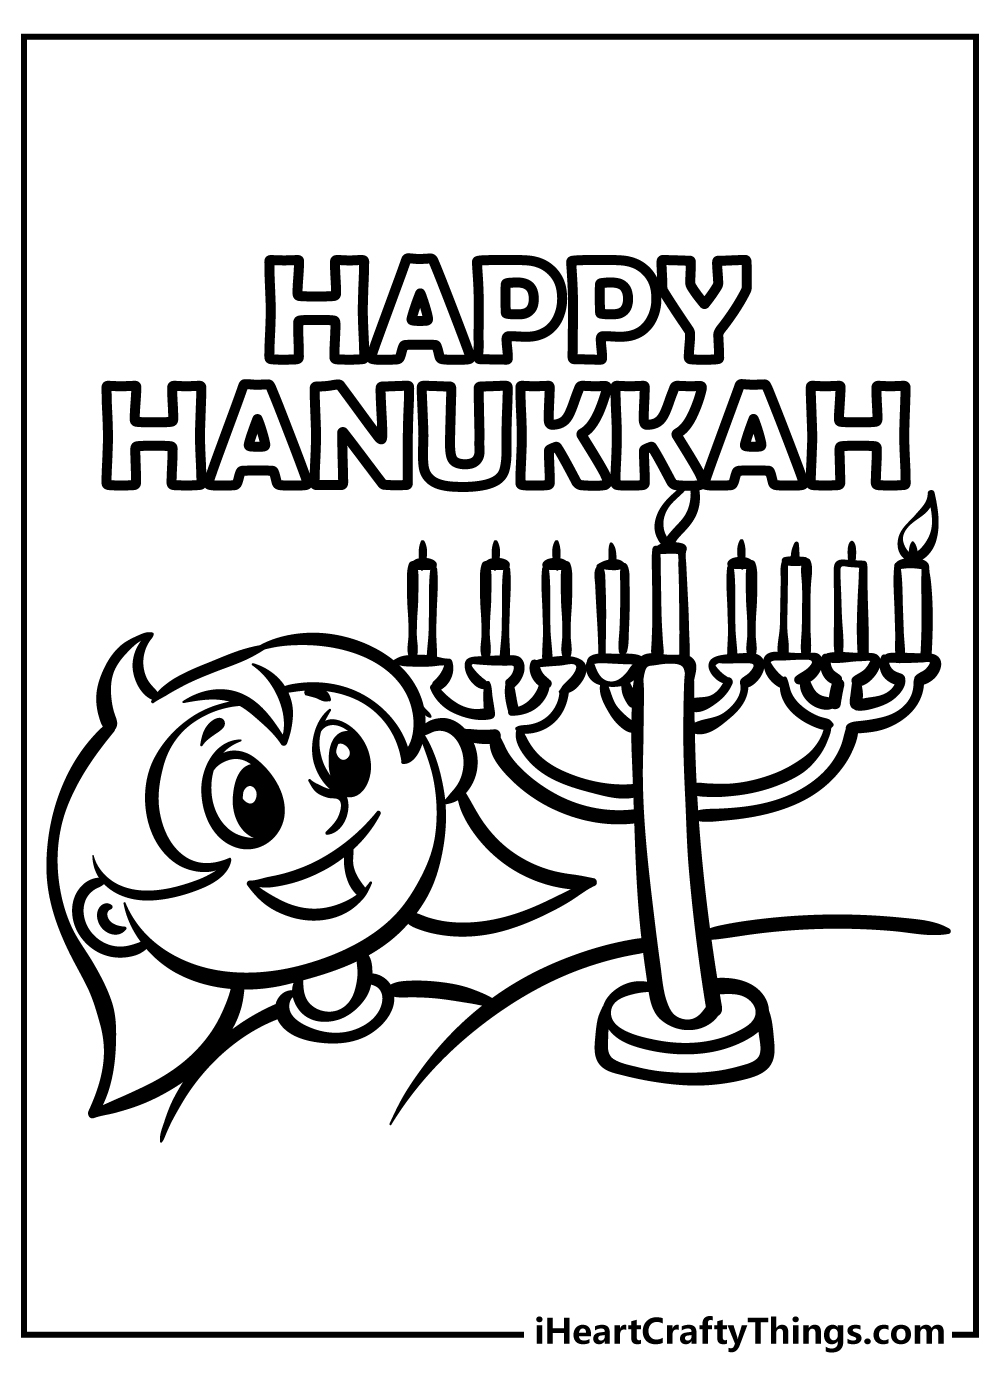 Hanukkah Coloring Pages for kids free download